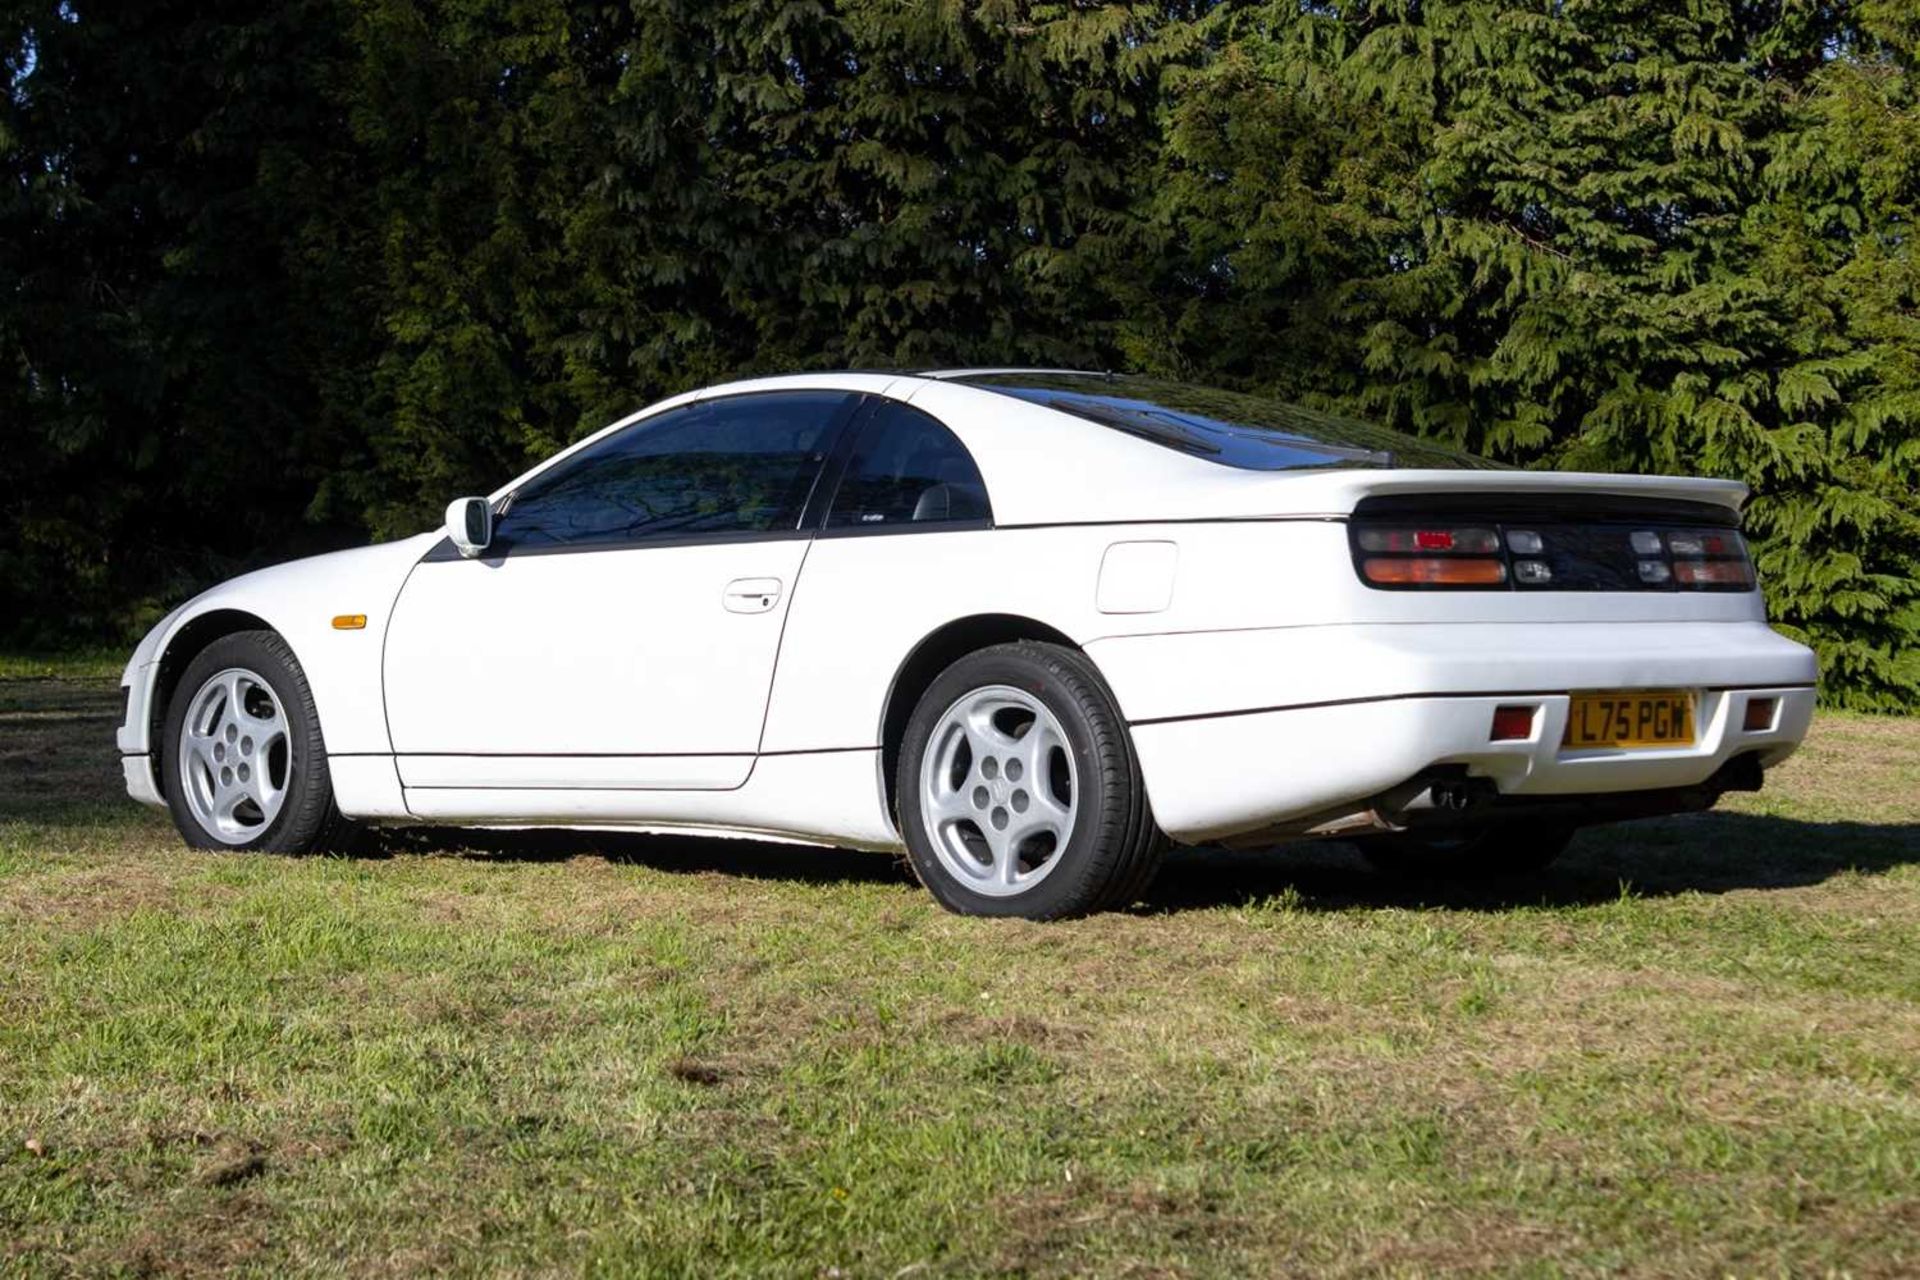 1990 Nissan 300ZX Turbo 2+2 Targa One of the last examples registered in the UK - Image 13 of 89